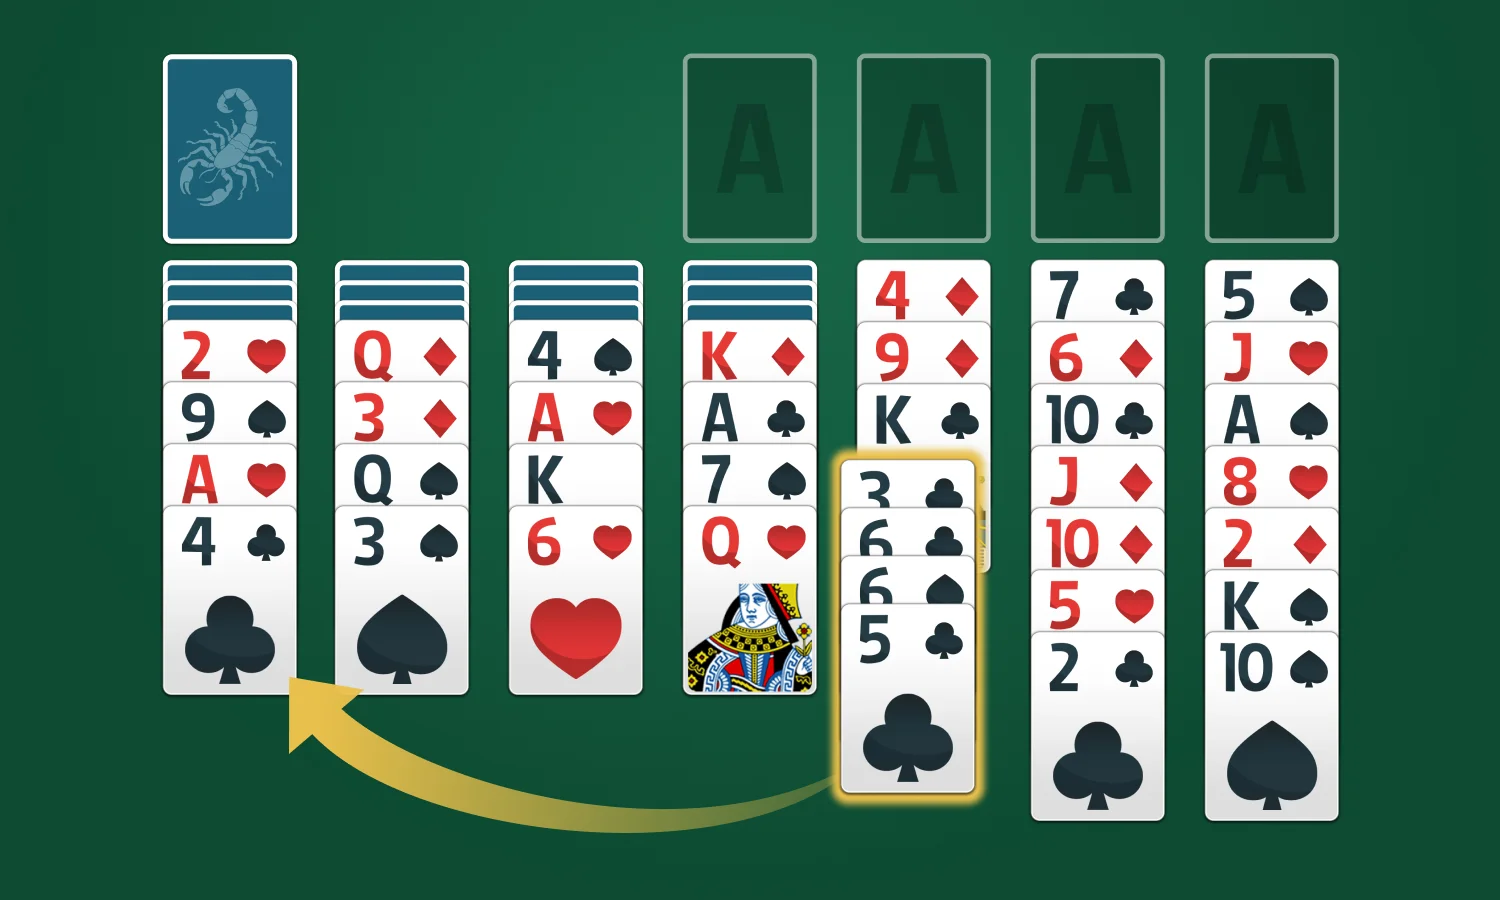 How to Play Scorpion Solitaire: Step 1